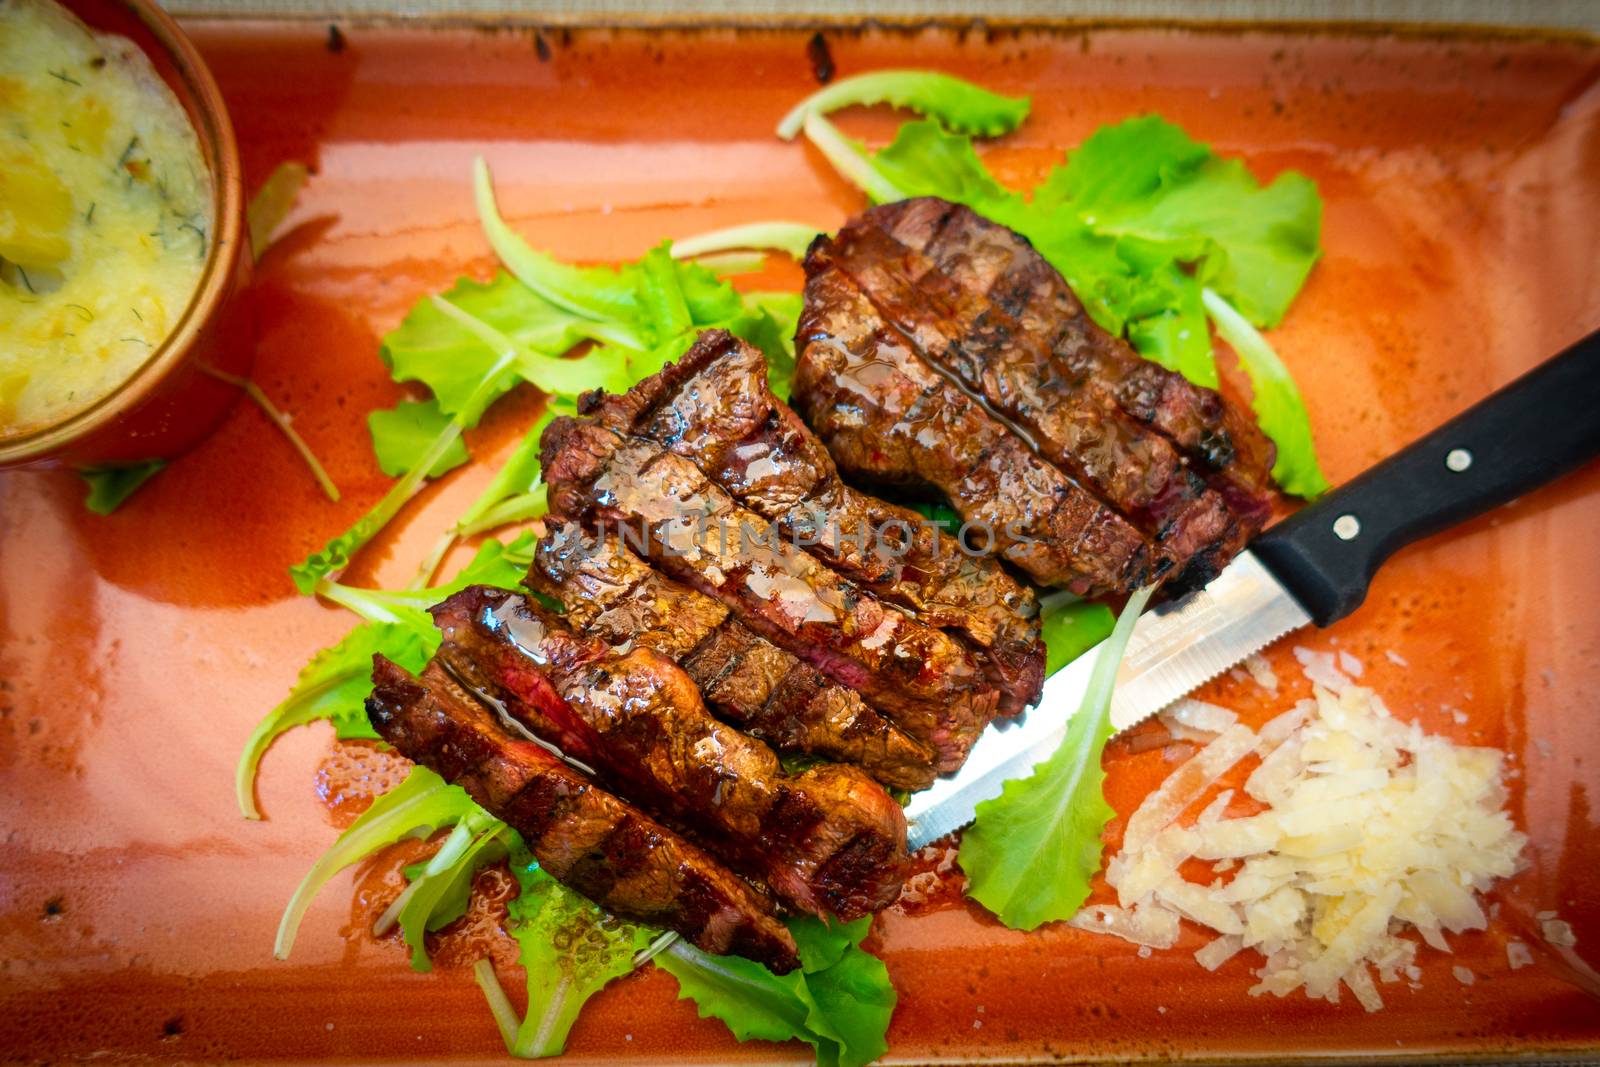 Top view of Traditional Italian Tagliata Steak with Parmesan and Salad as close-up on a plate